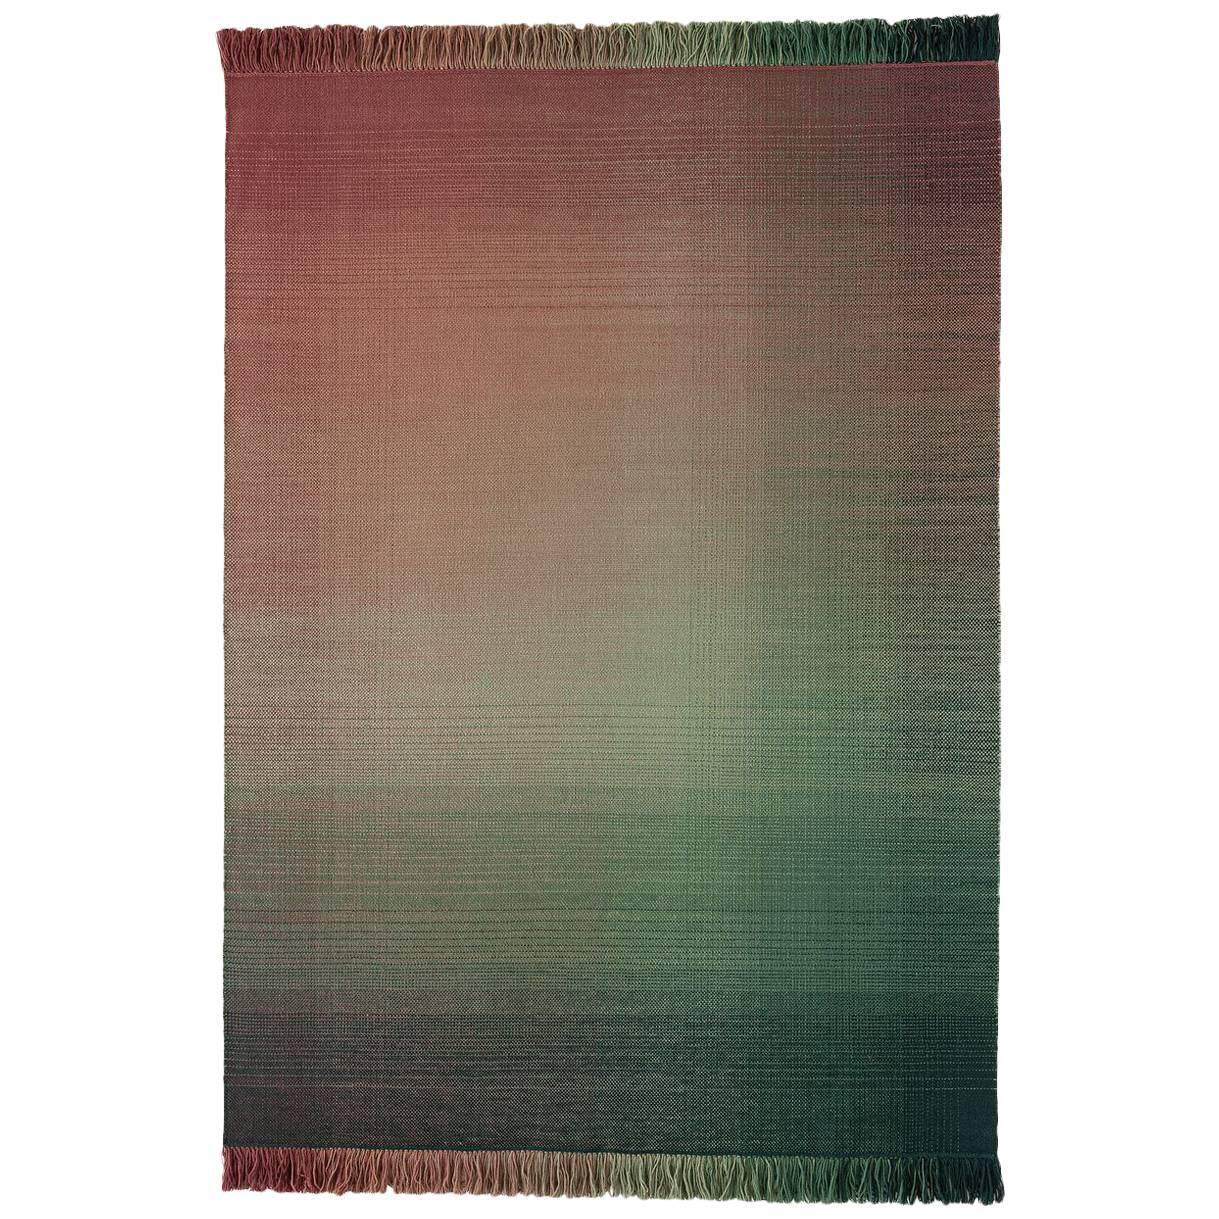 Nanimarquina Hand-Loomed Wool Shade Collection, Large Rug 3 by Begüm Cana Özgür